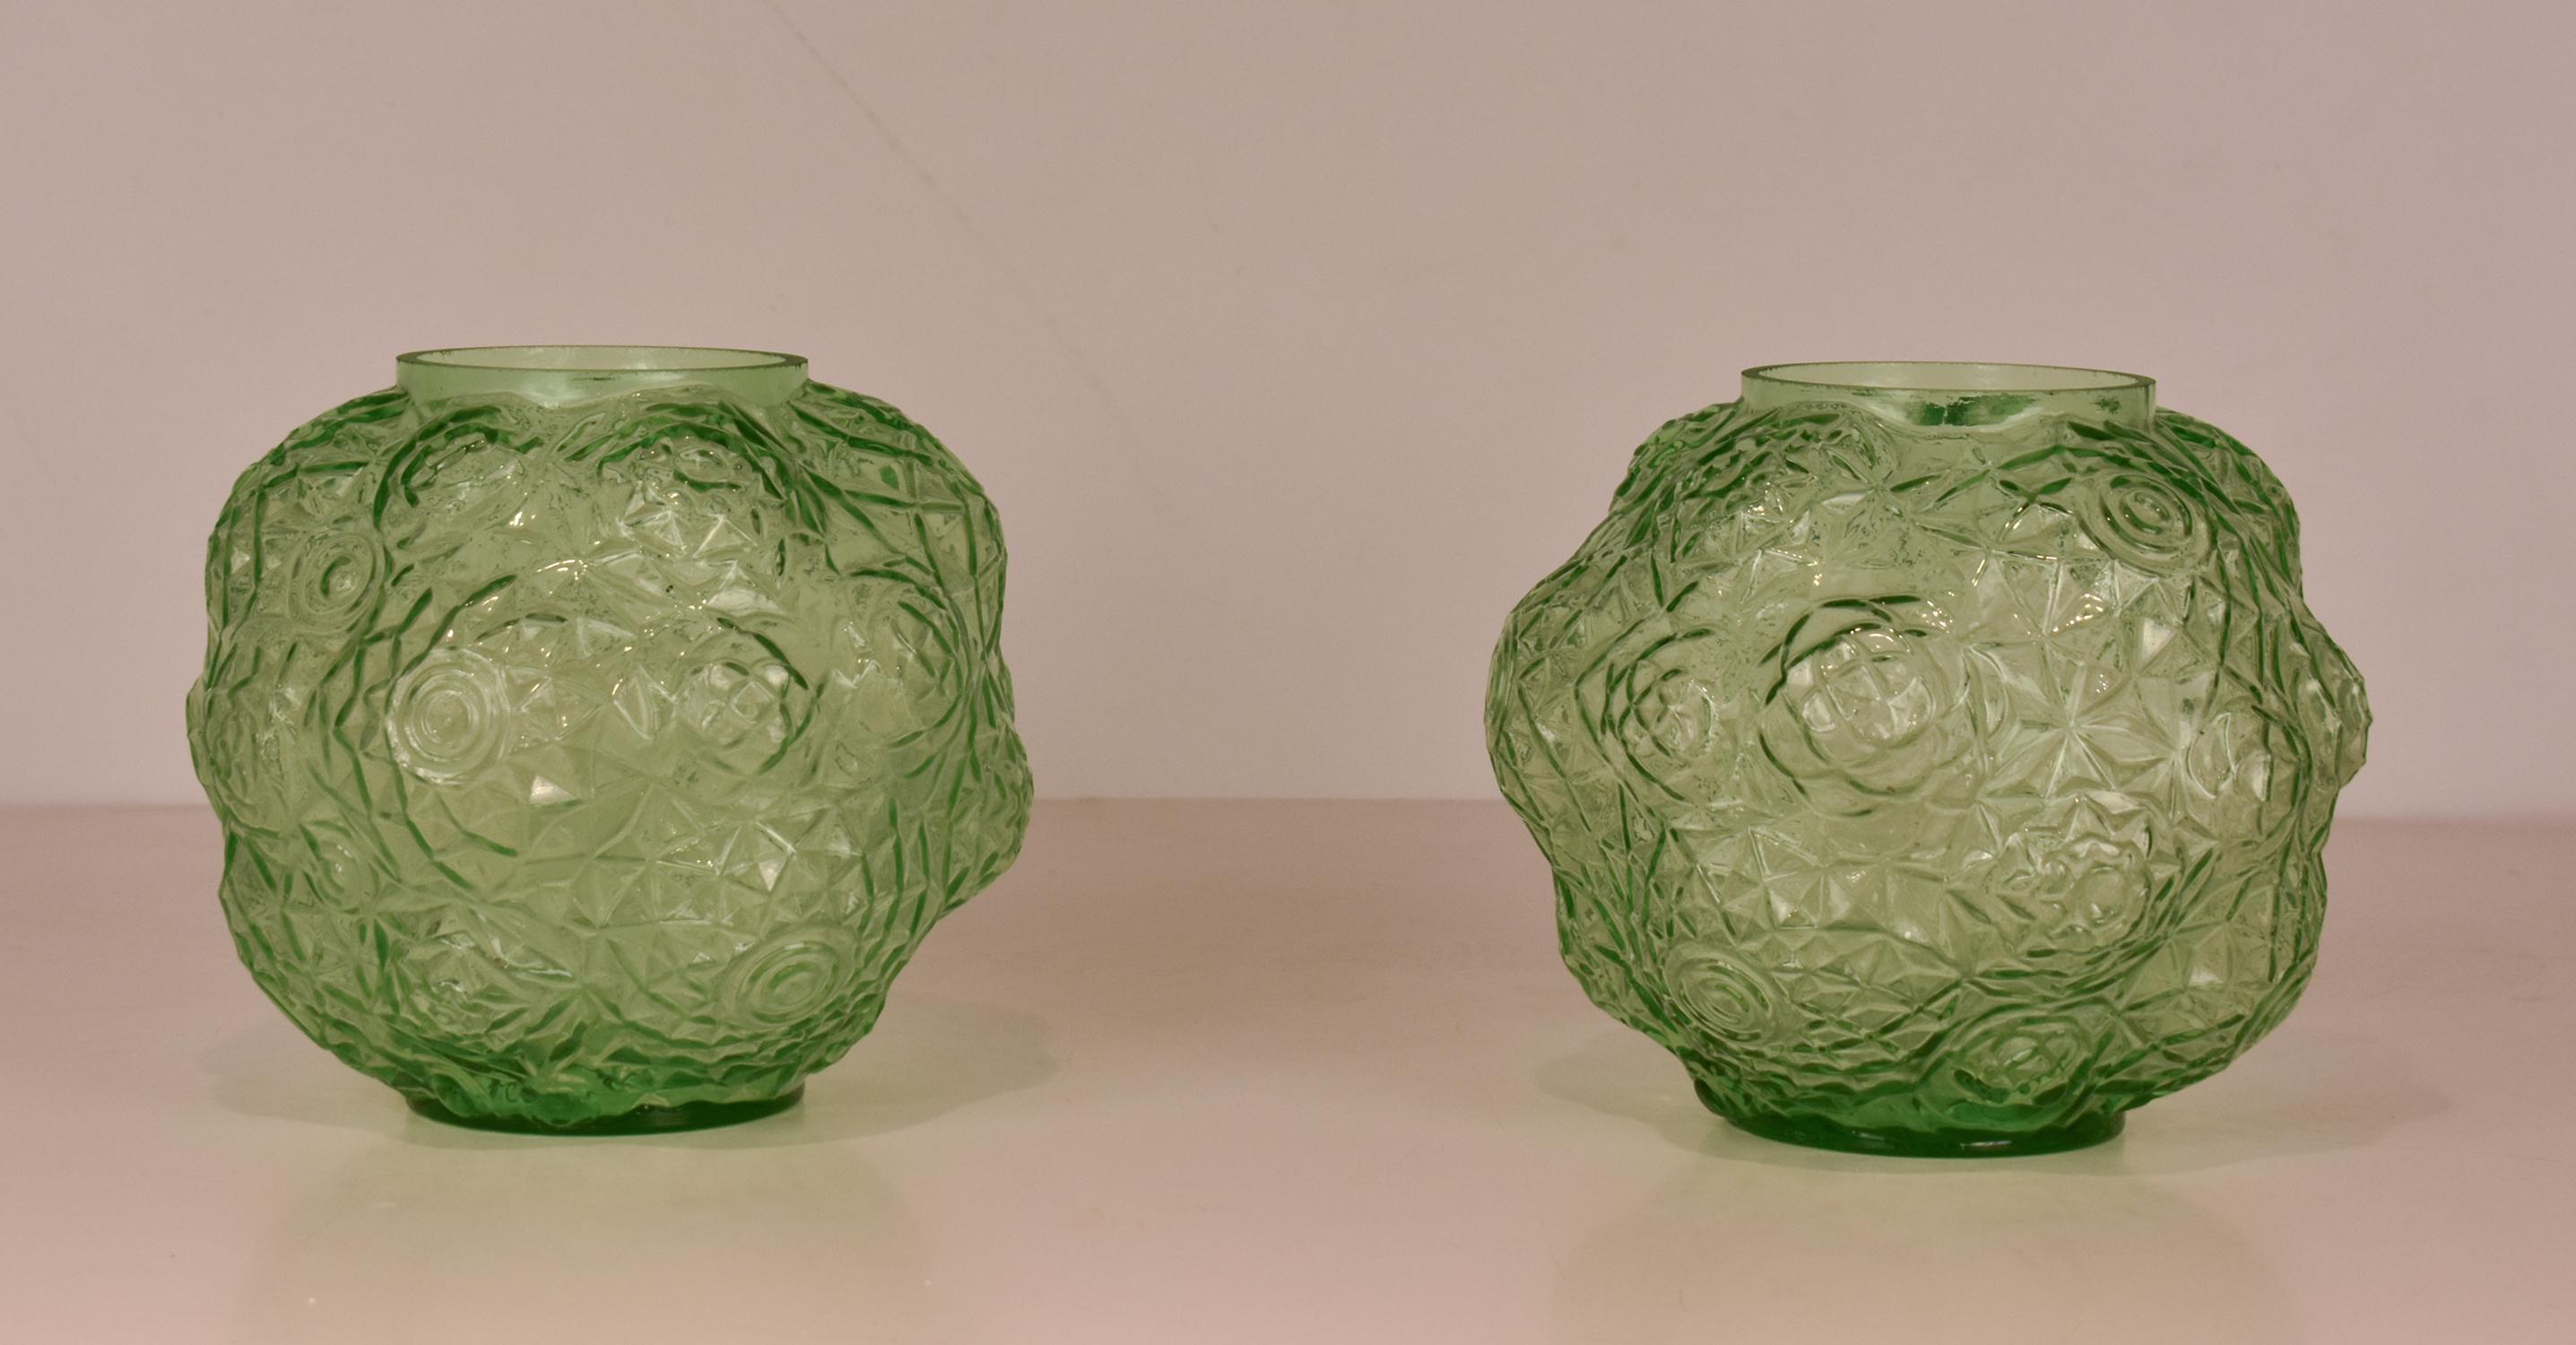 Pair of art deco vases in green glass. 1930's.
Made of green glass with geometric motifs.